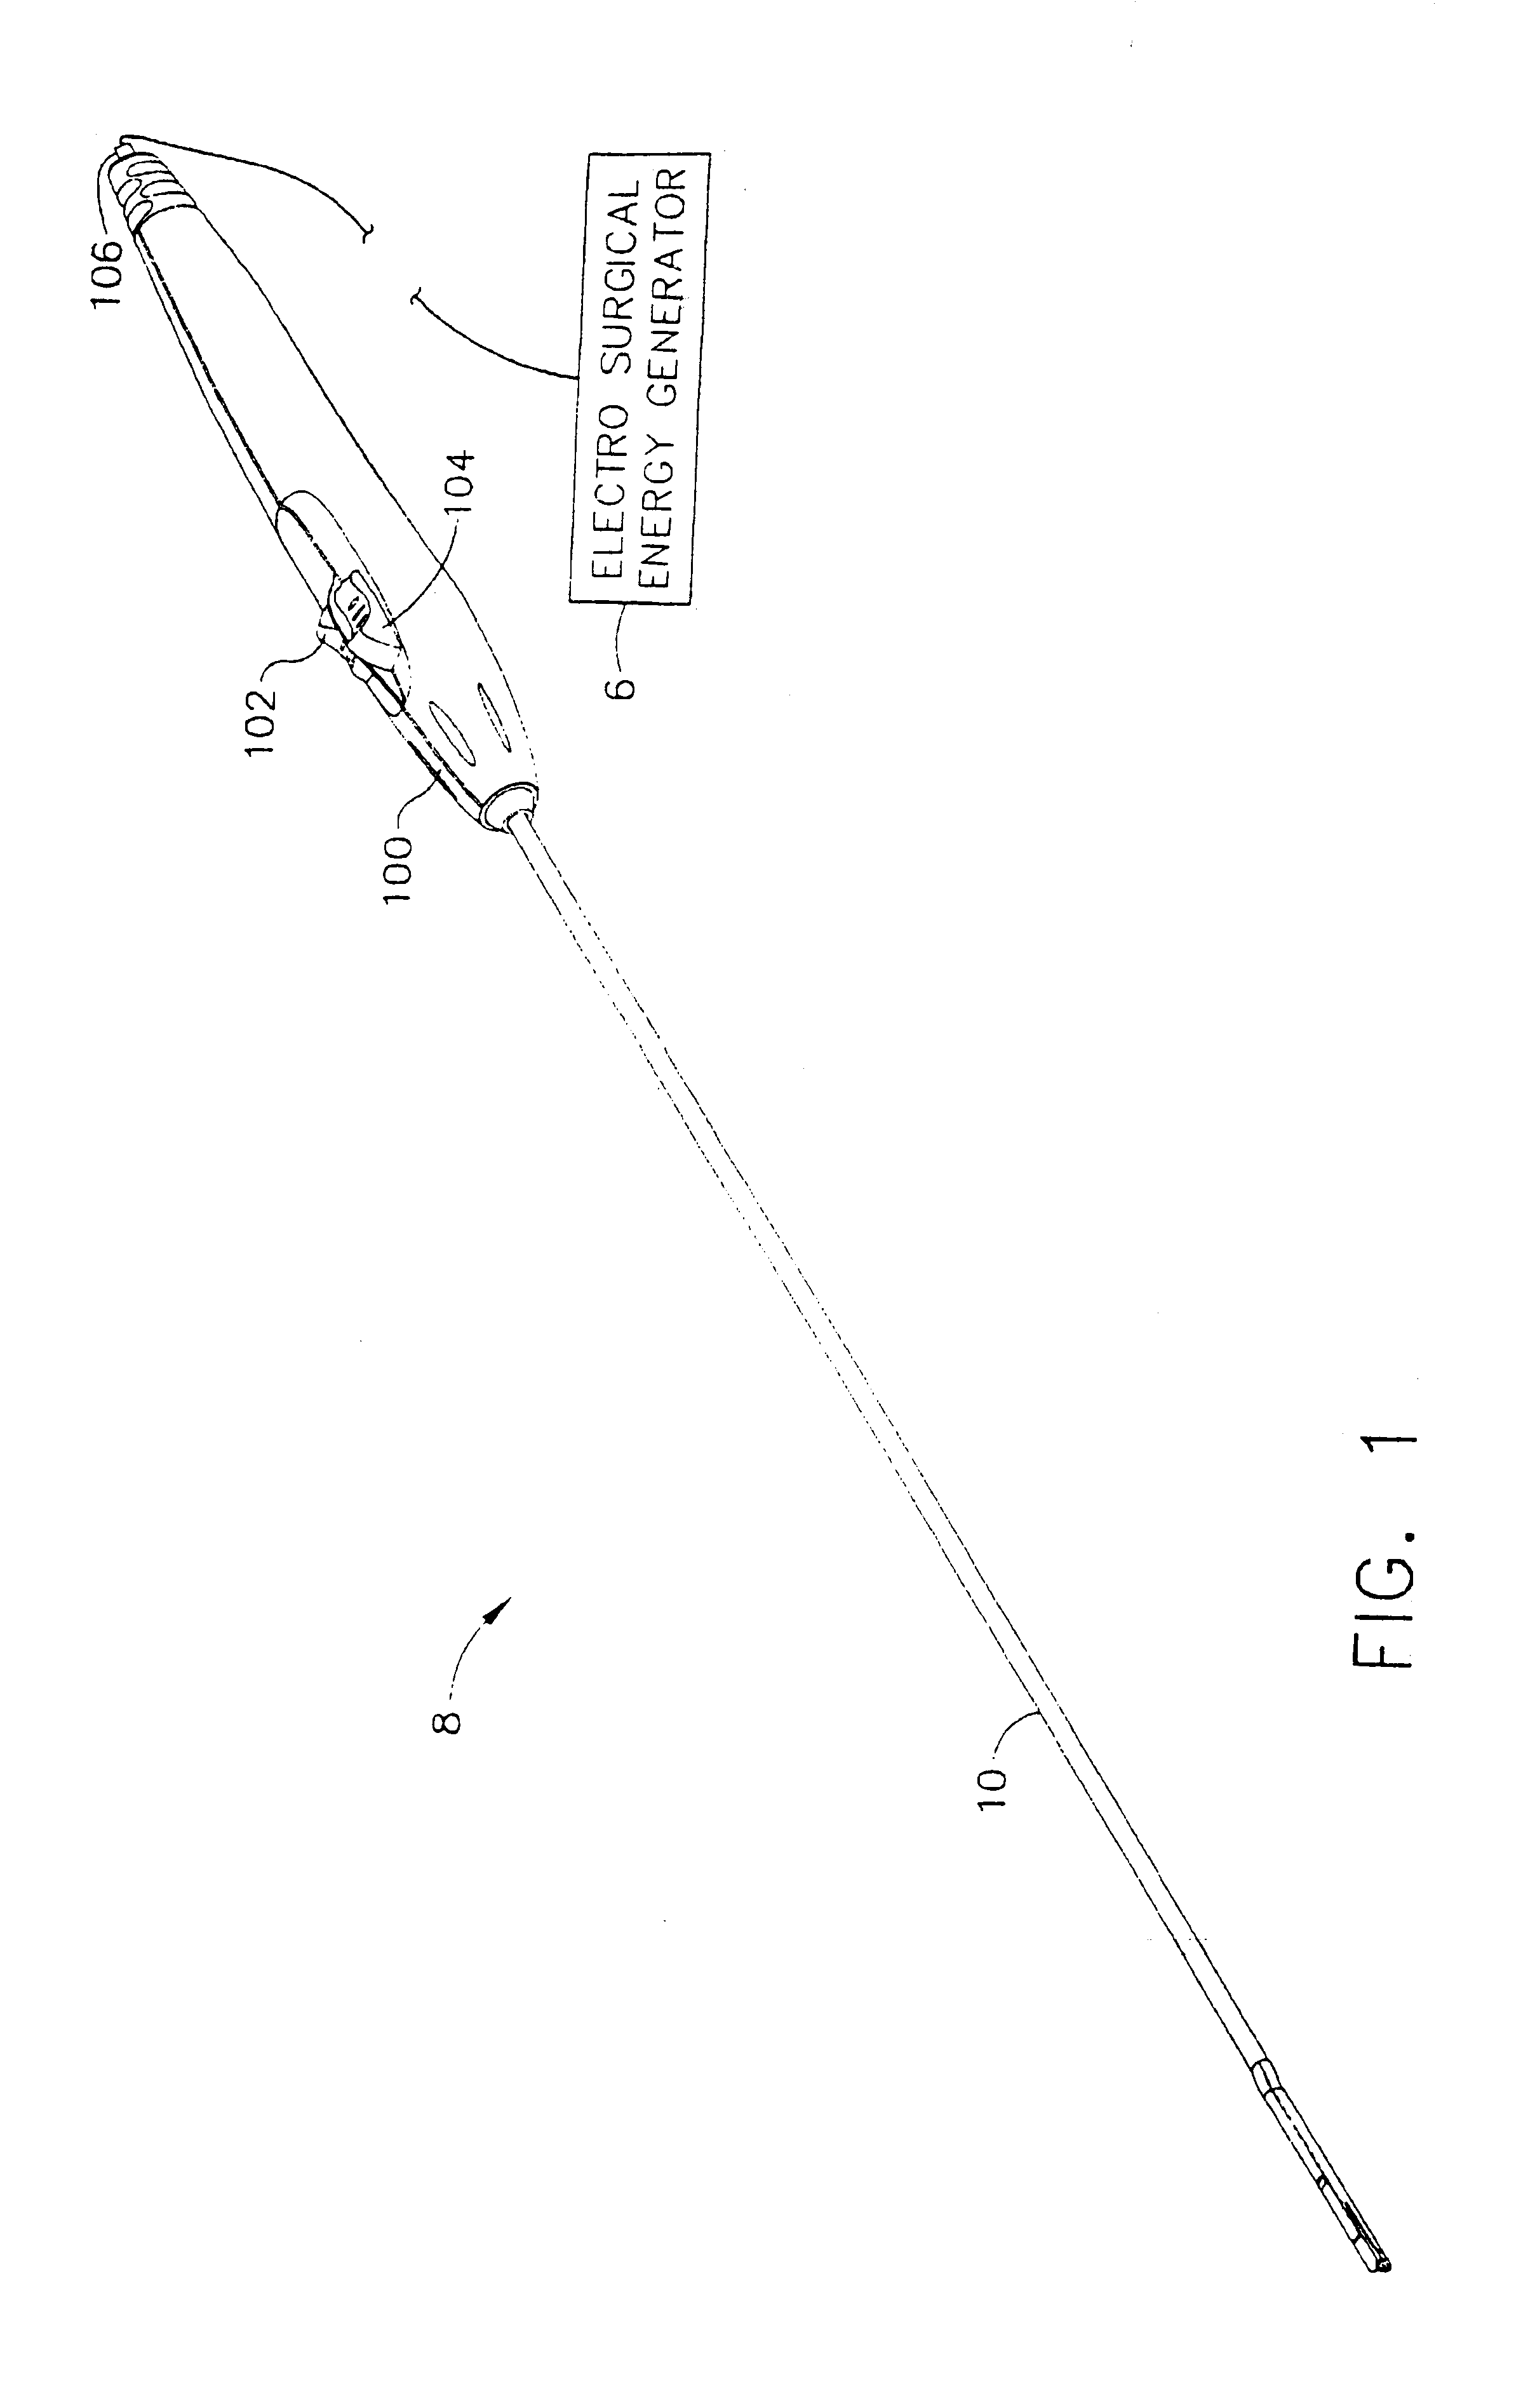 Electrosurgical instrument with minimally invasive jaws